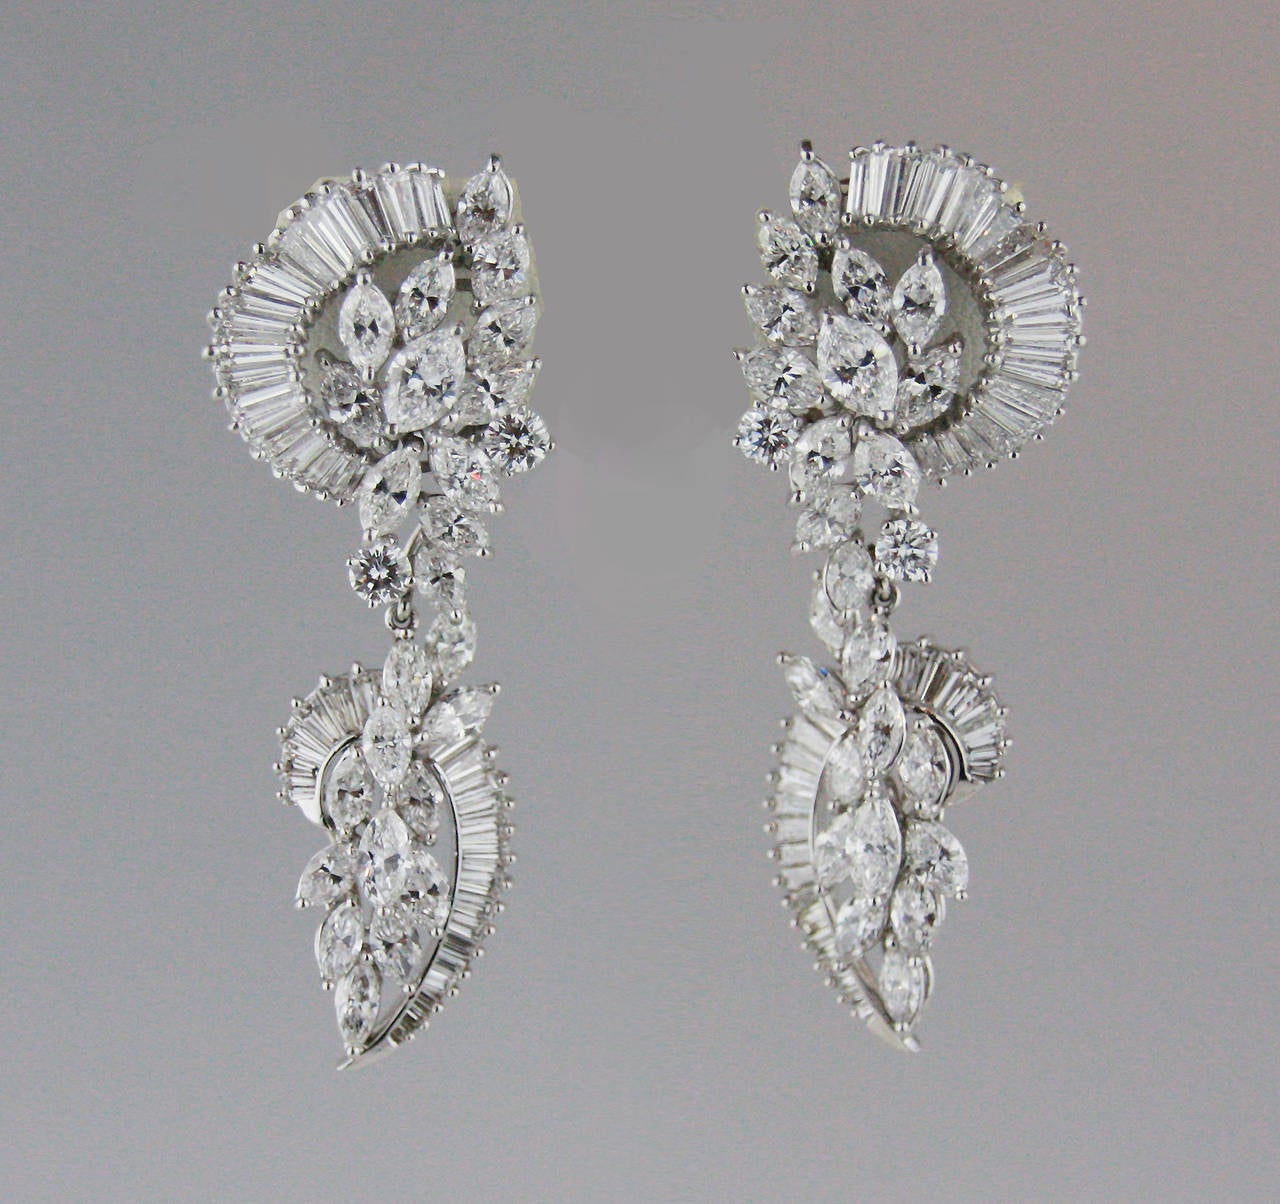 1960s Diamond earrings set with approximately 19 carats of marquise, round and baguette shaped diamonds. The diamonds are G/H in color and mostly VS in clarity. The bottoms are removable.